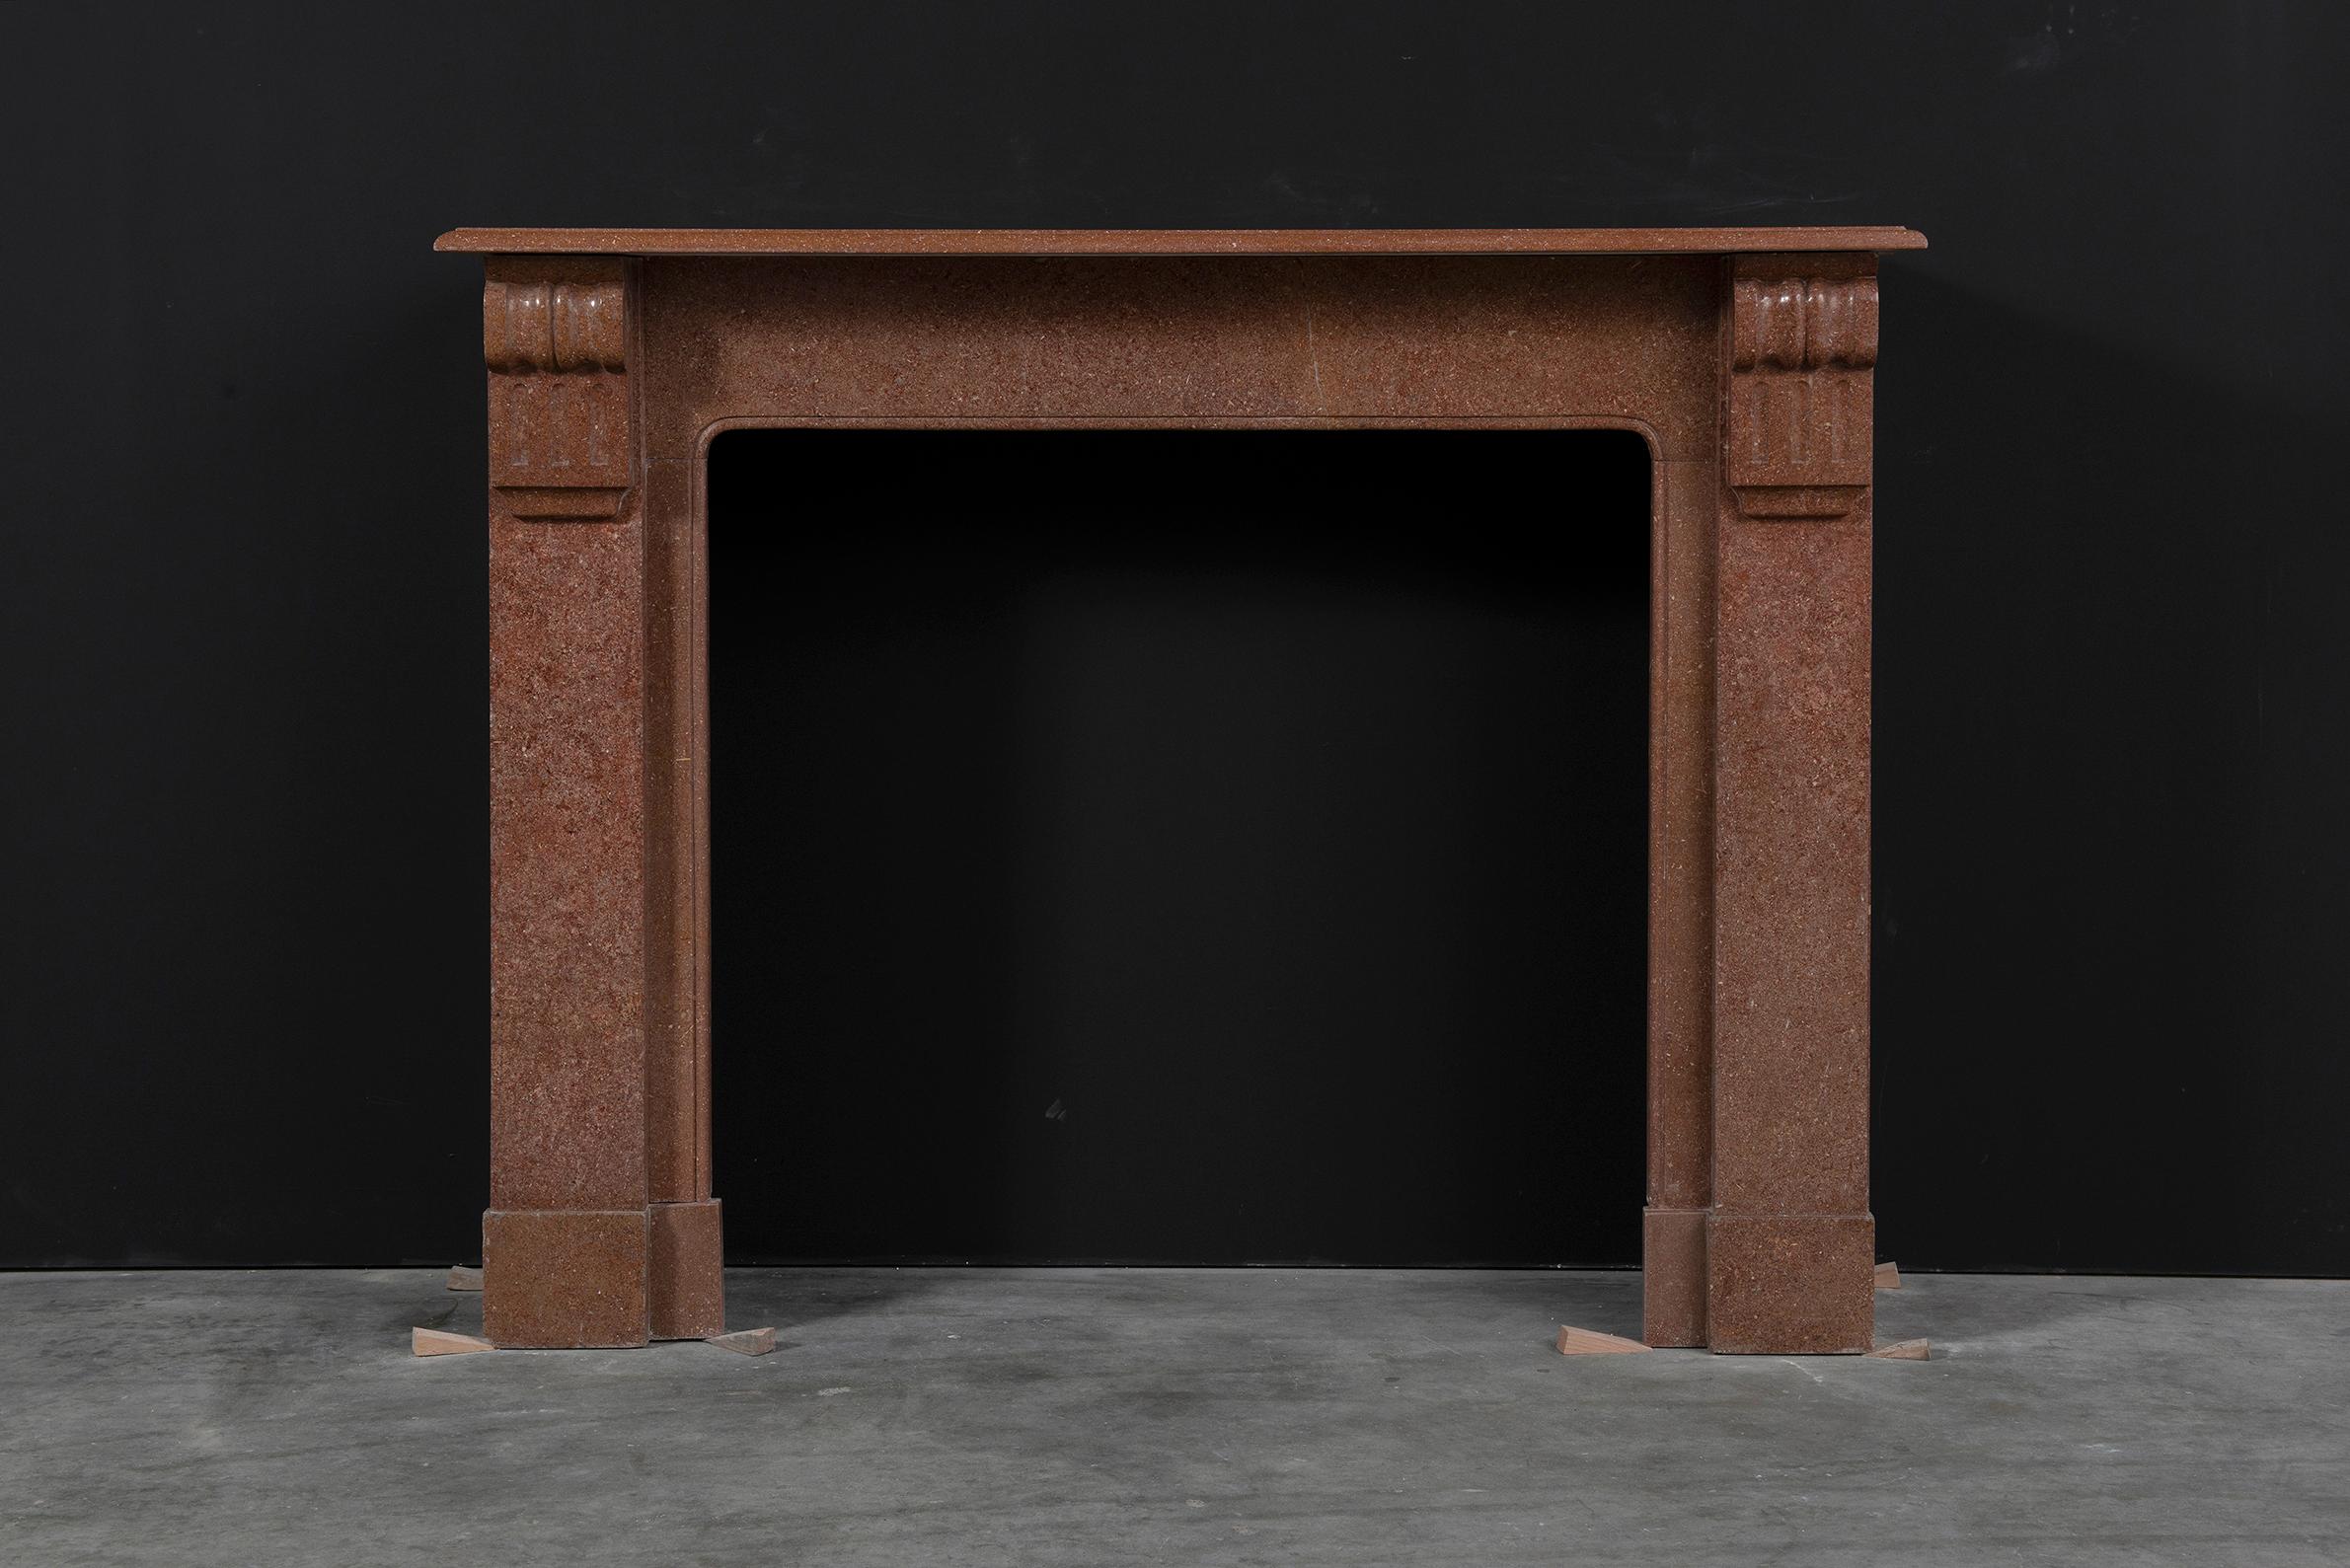 Lovely little French Louis Phillipe style fireplace in war deep red marble.
Nice rectangular and profiled topshelf above two simple but decorative corbels on straight jamb above plain endblocks.

Great proportions. Opening is almost square which